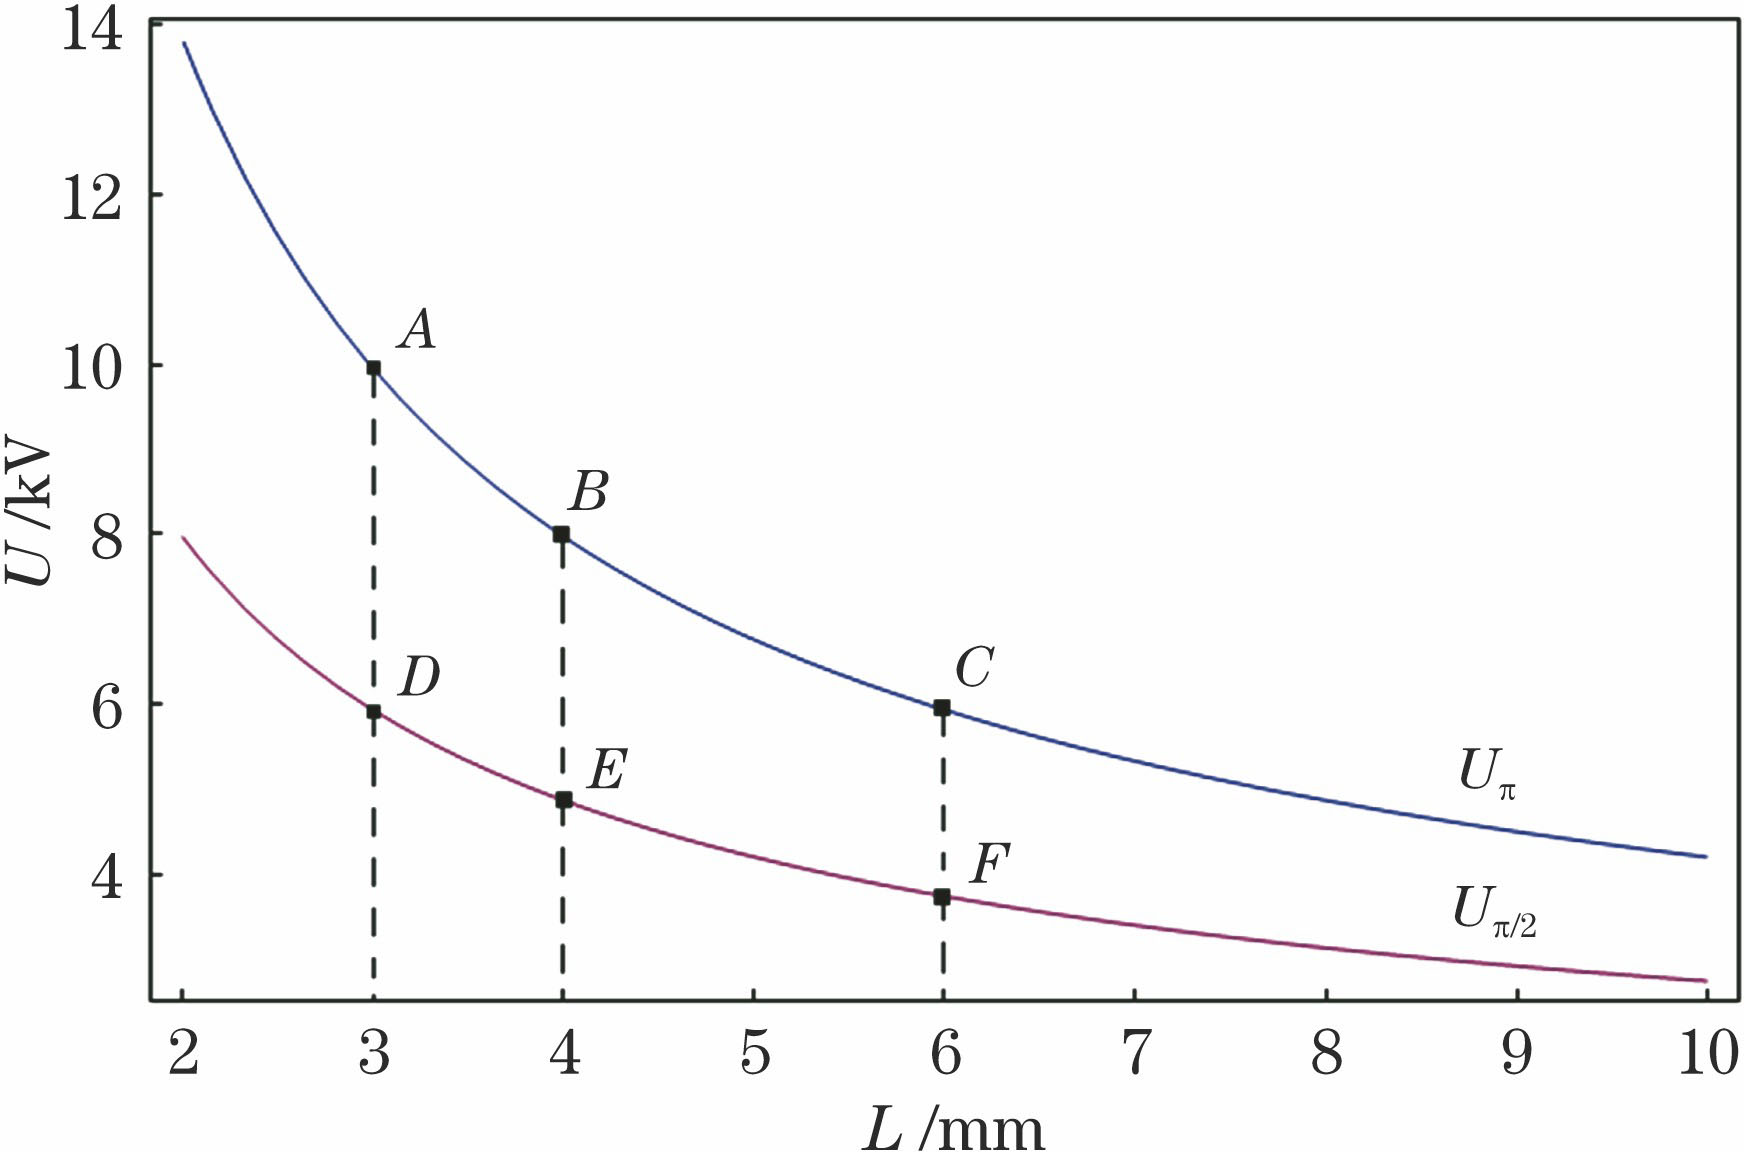 Curves of π-voltage Uπ and π/2-voltage Uπ/2 of BSO20 crystal versus its length L